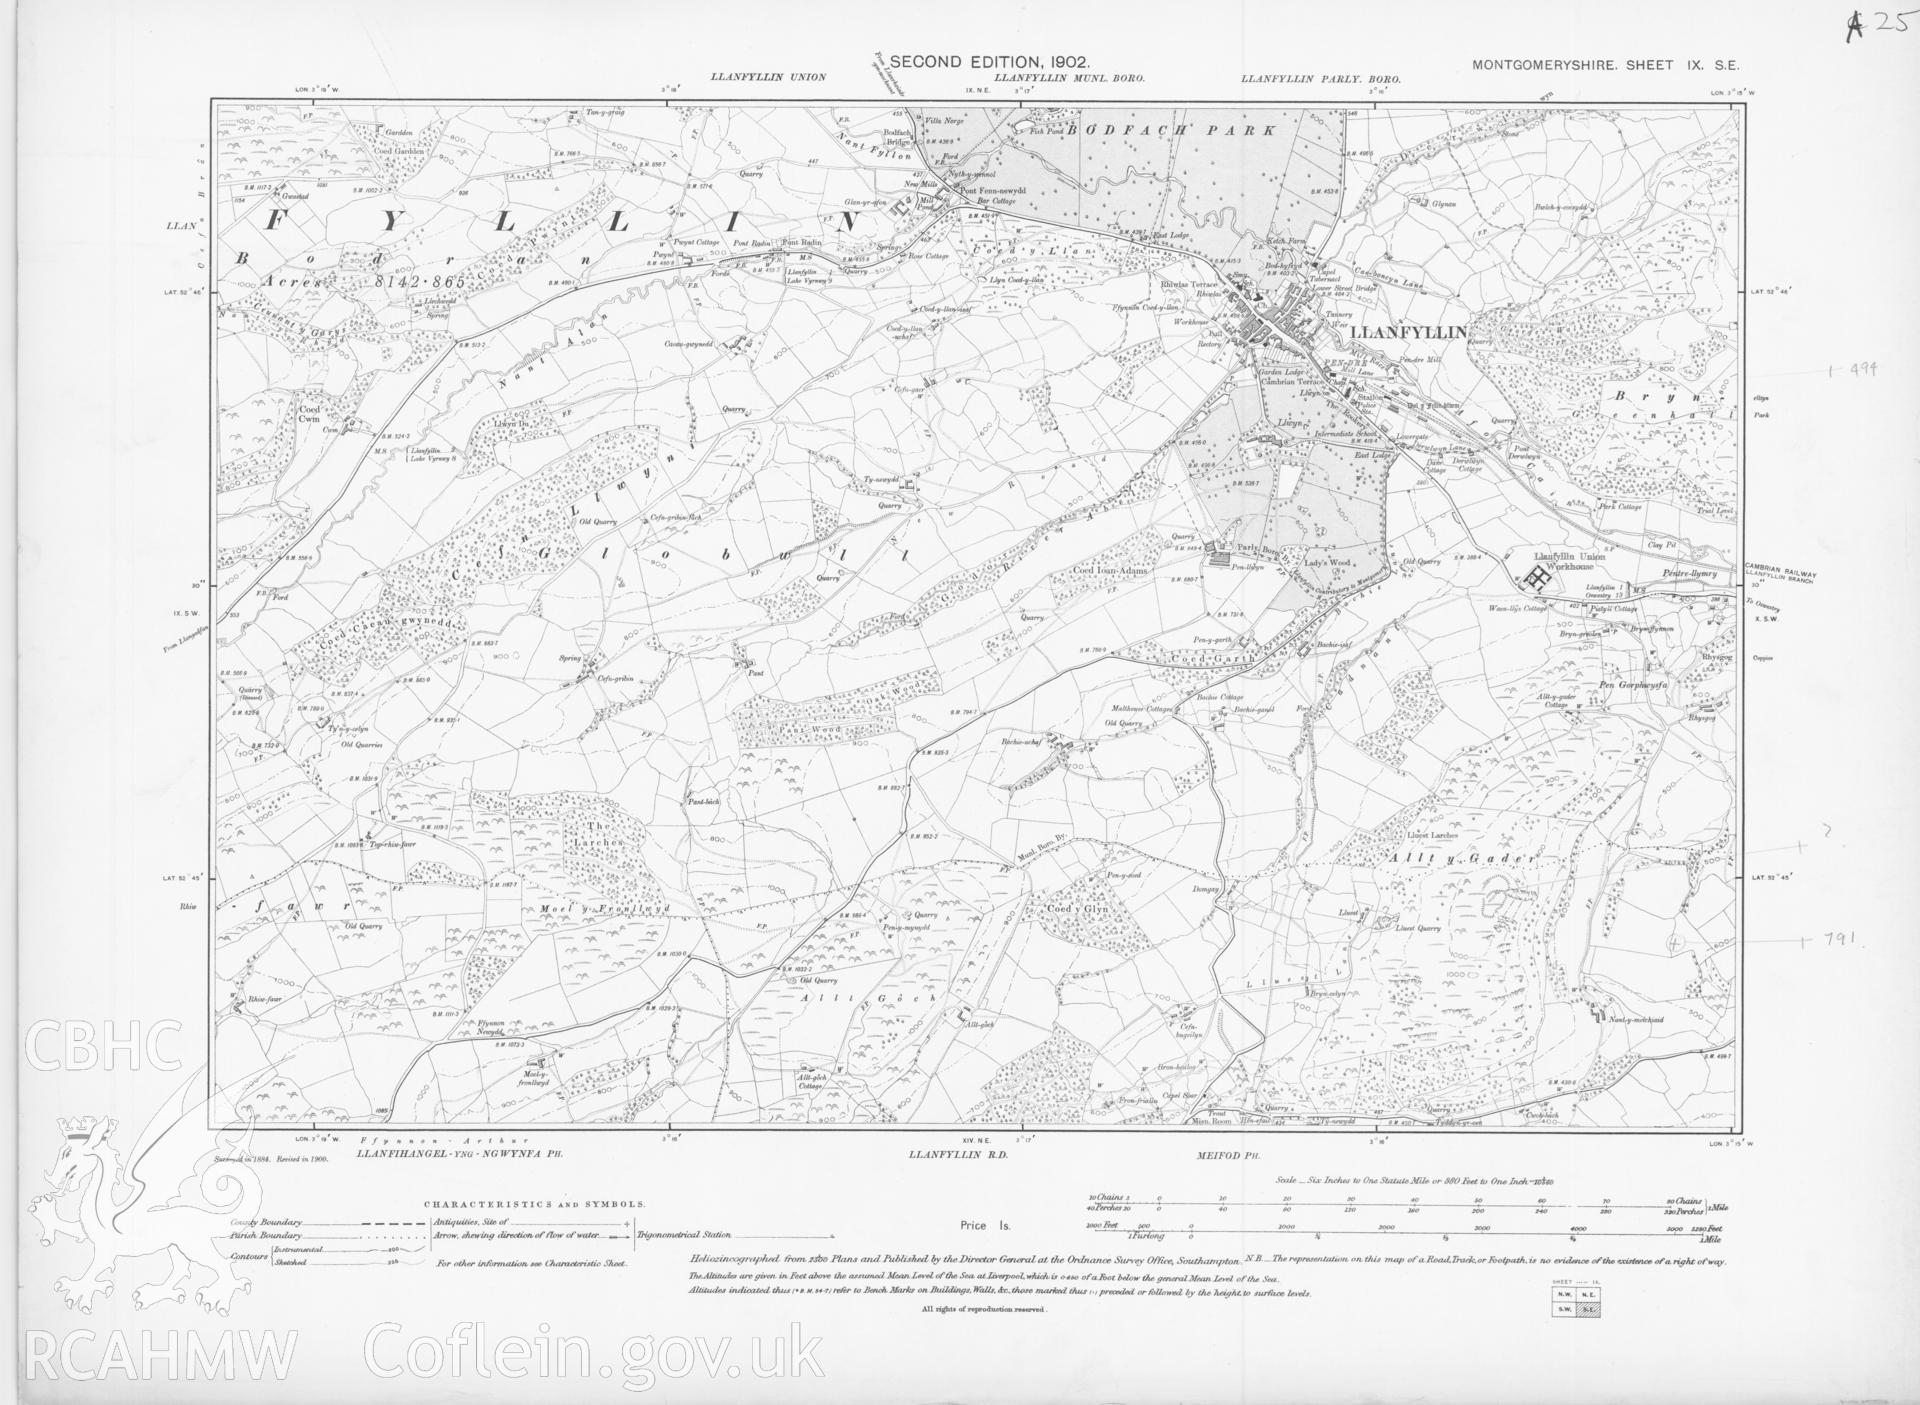 Digital copy of an Ordnance Survey second edition county series map, six inch, 1:10560, ungridded, showing Llanfyllin area.